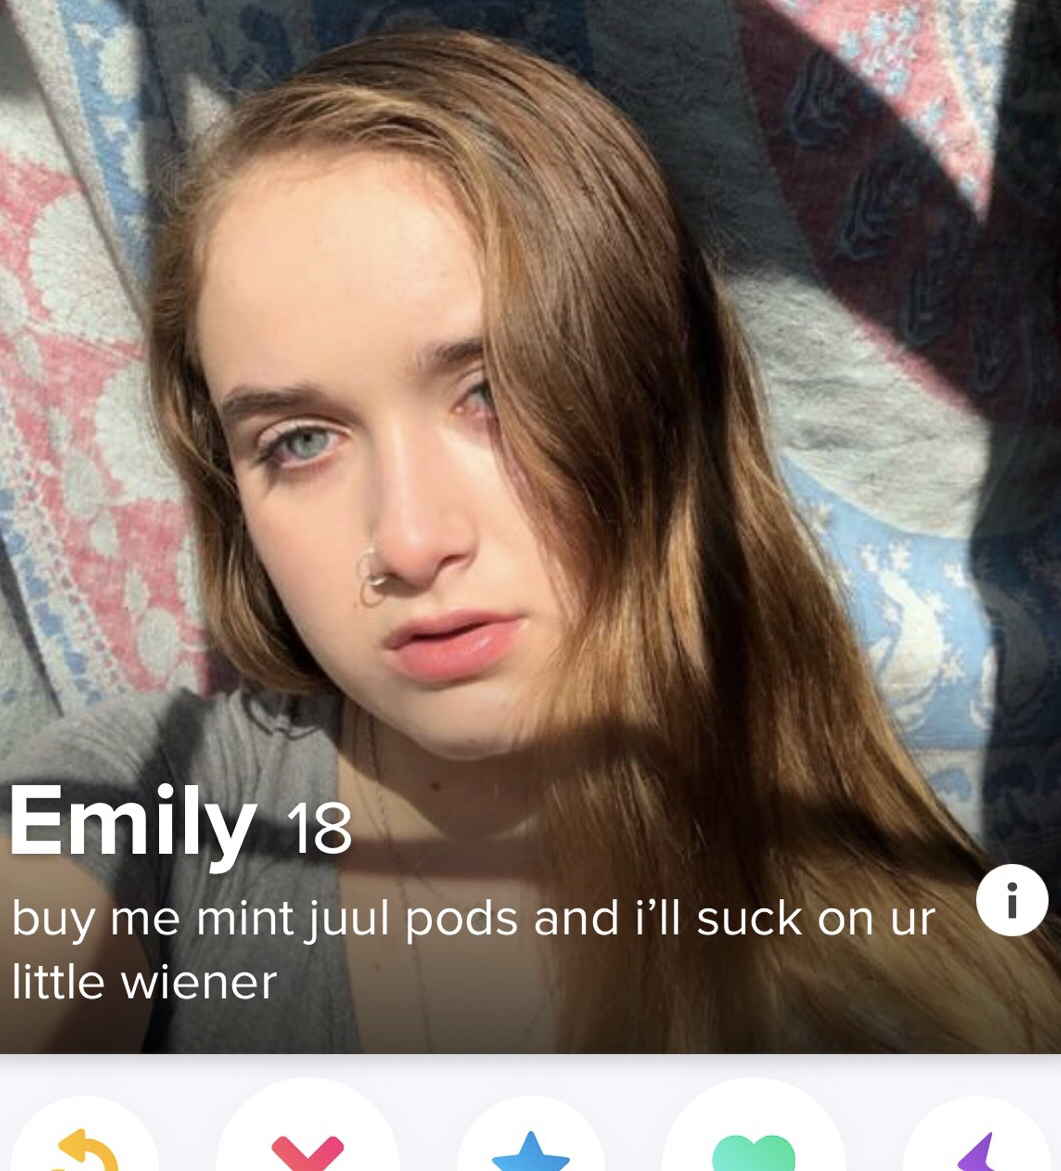 hair coloring - Emily 18 buy me mint juul pods and i'll suck on ur little wiener